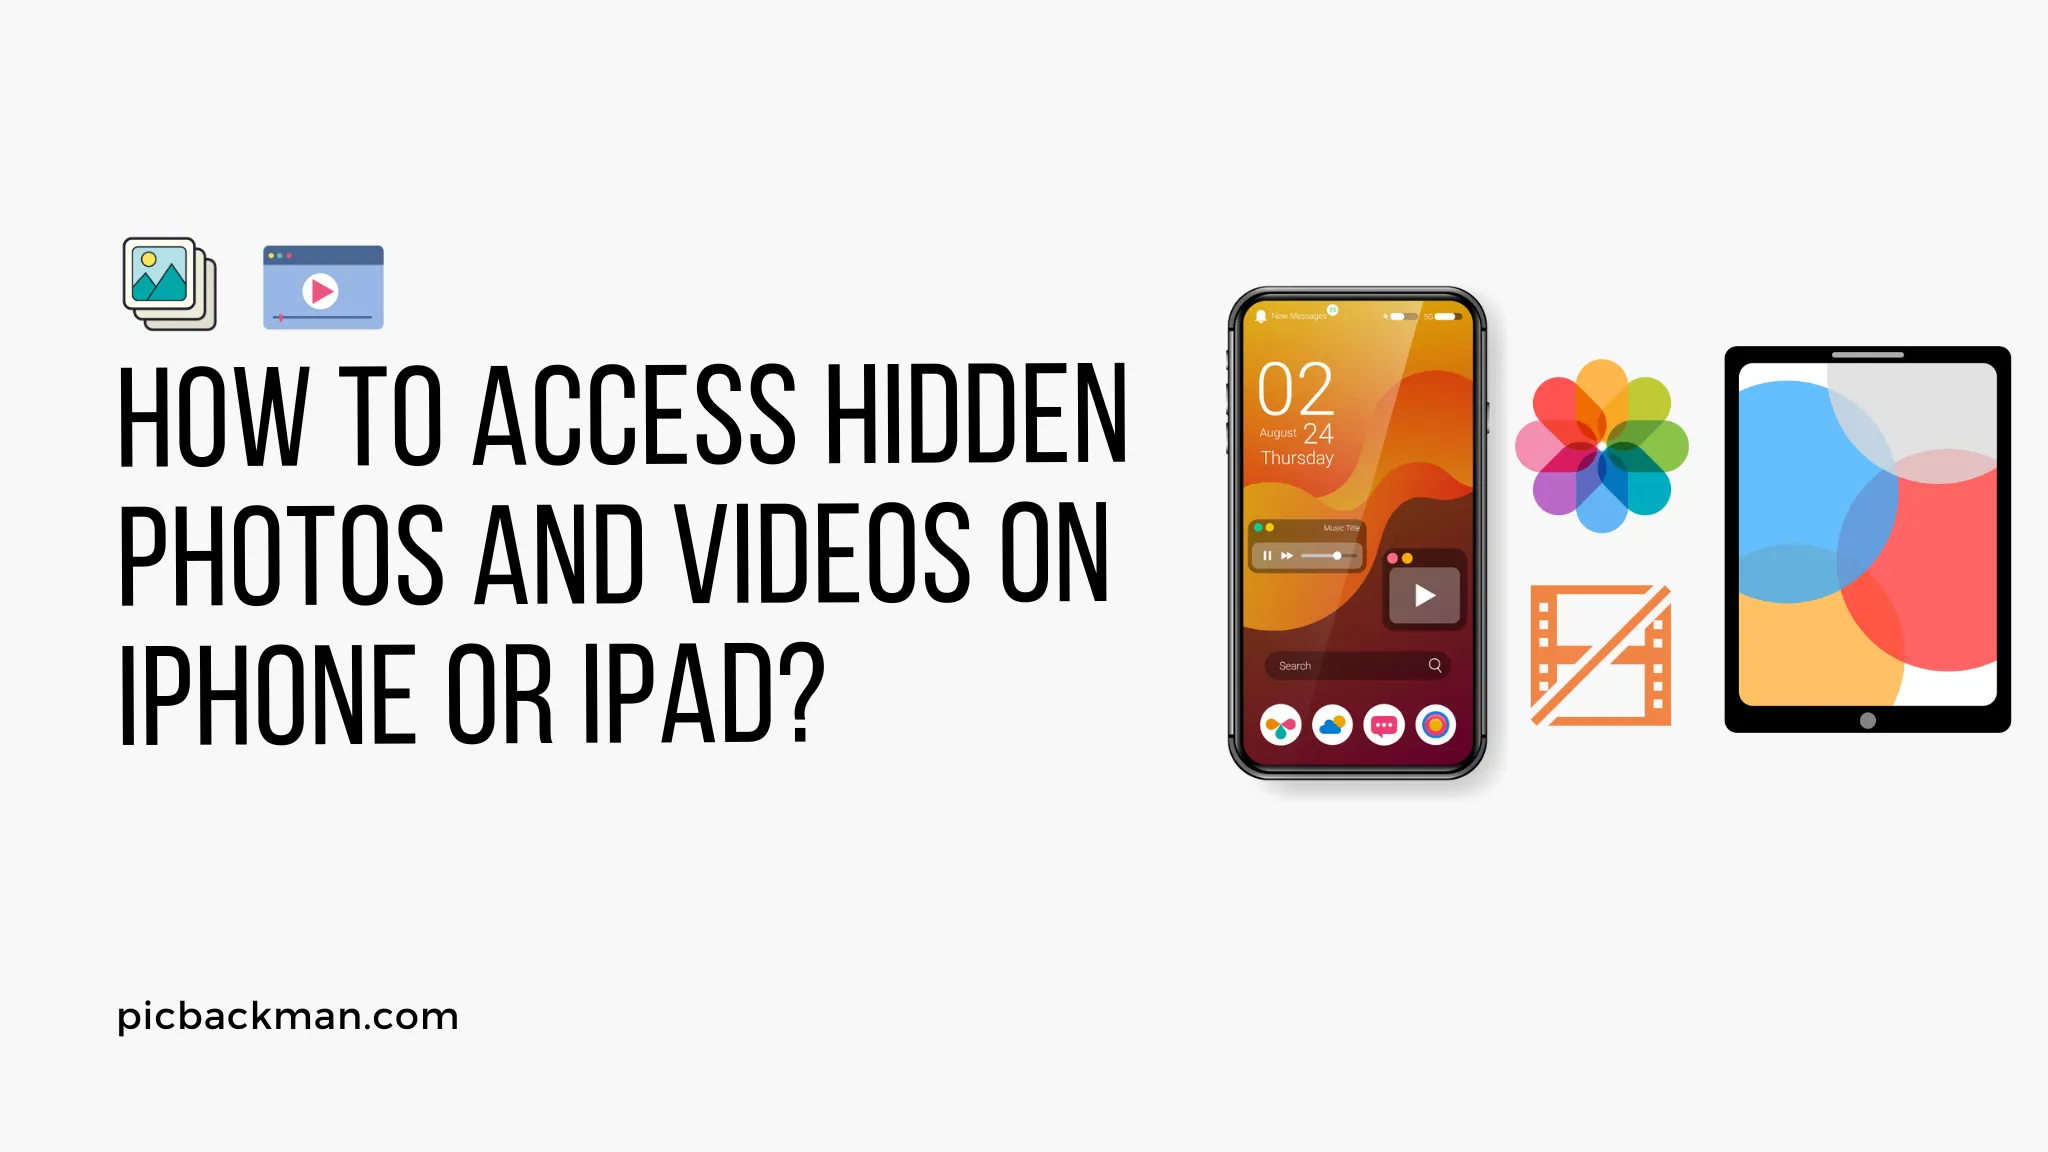 How To Access Hidden Photos and Videos on iPhone or iPad?